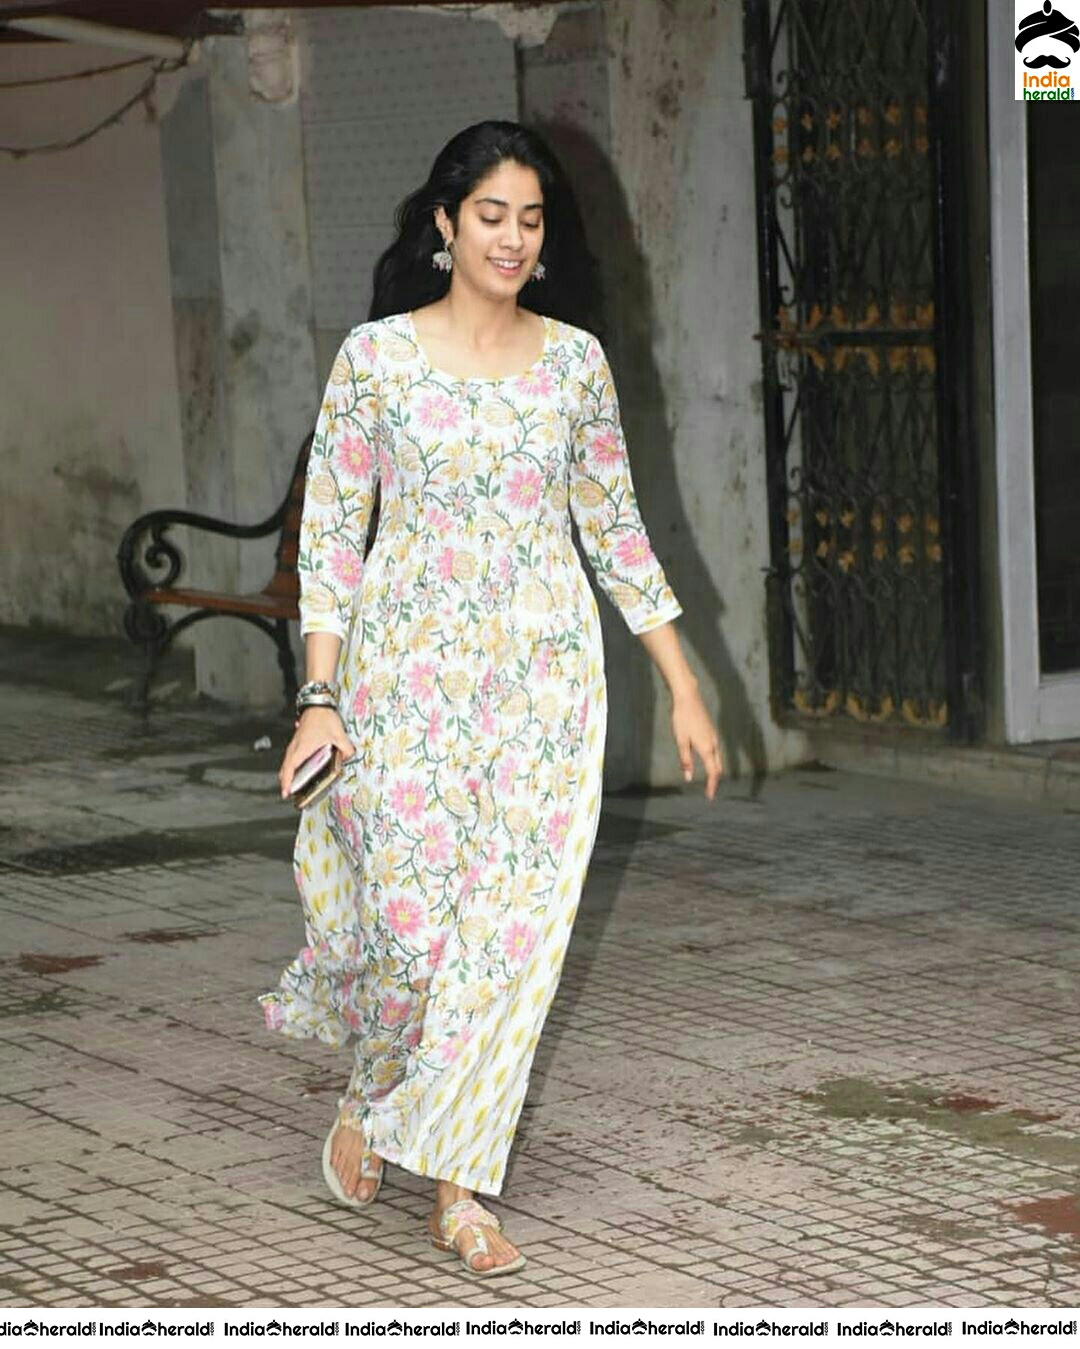 Jahnvi Spotted In A Long Floral Print Frock At Juhu